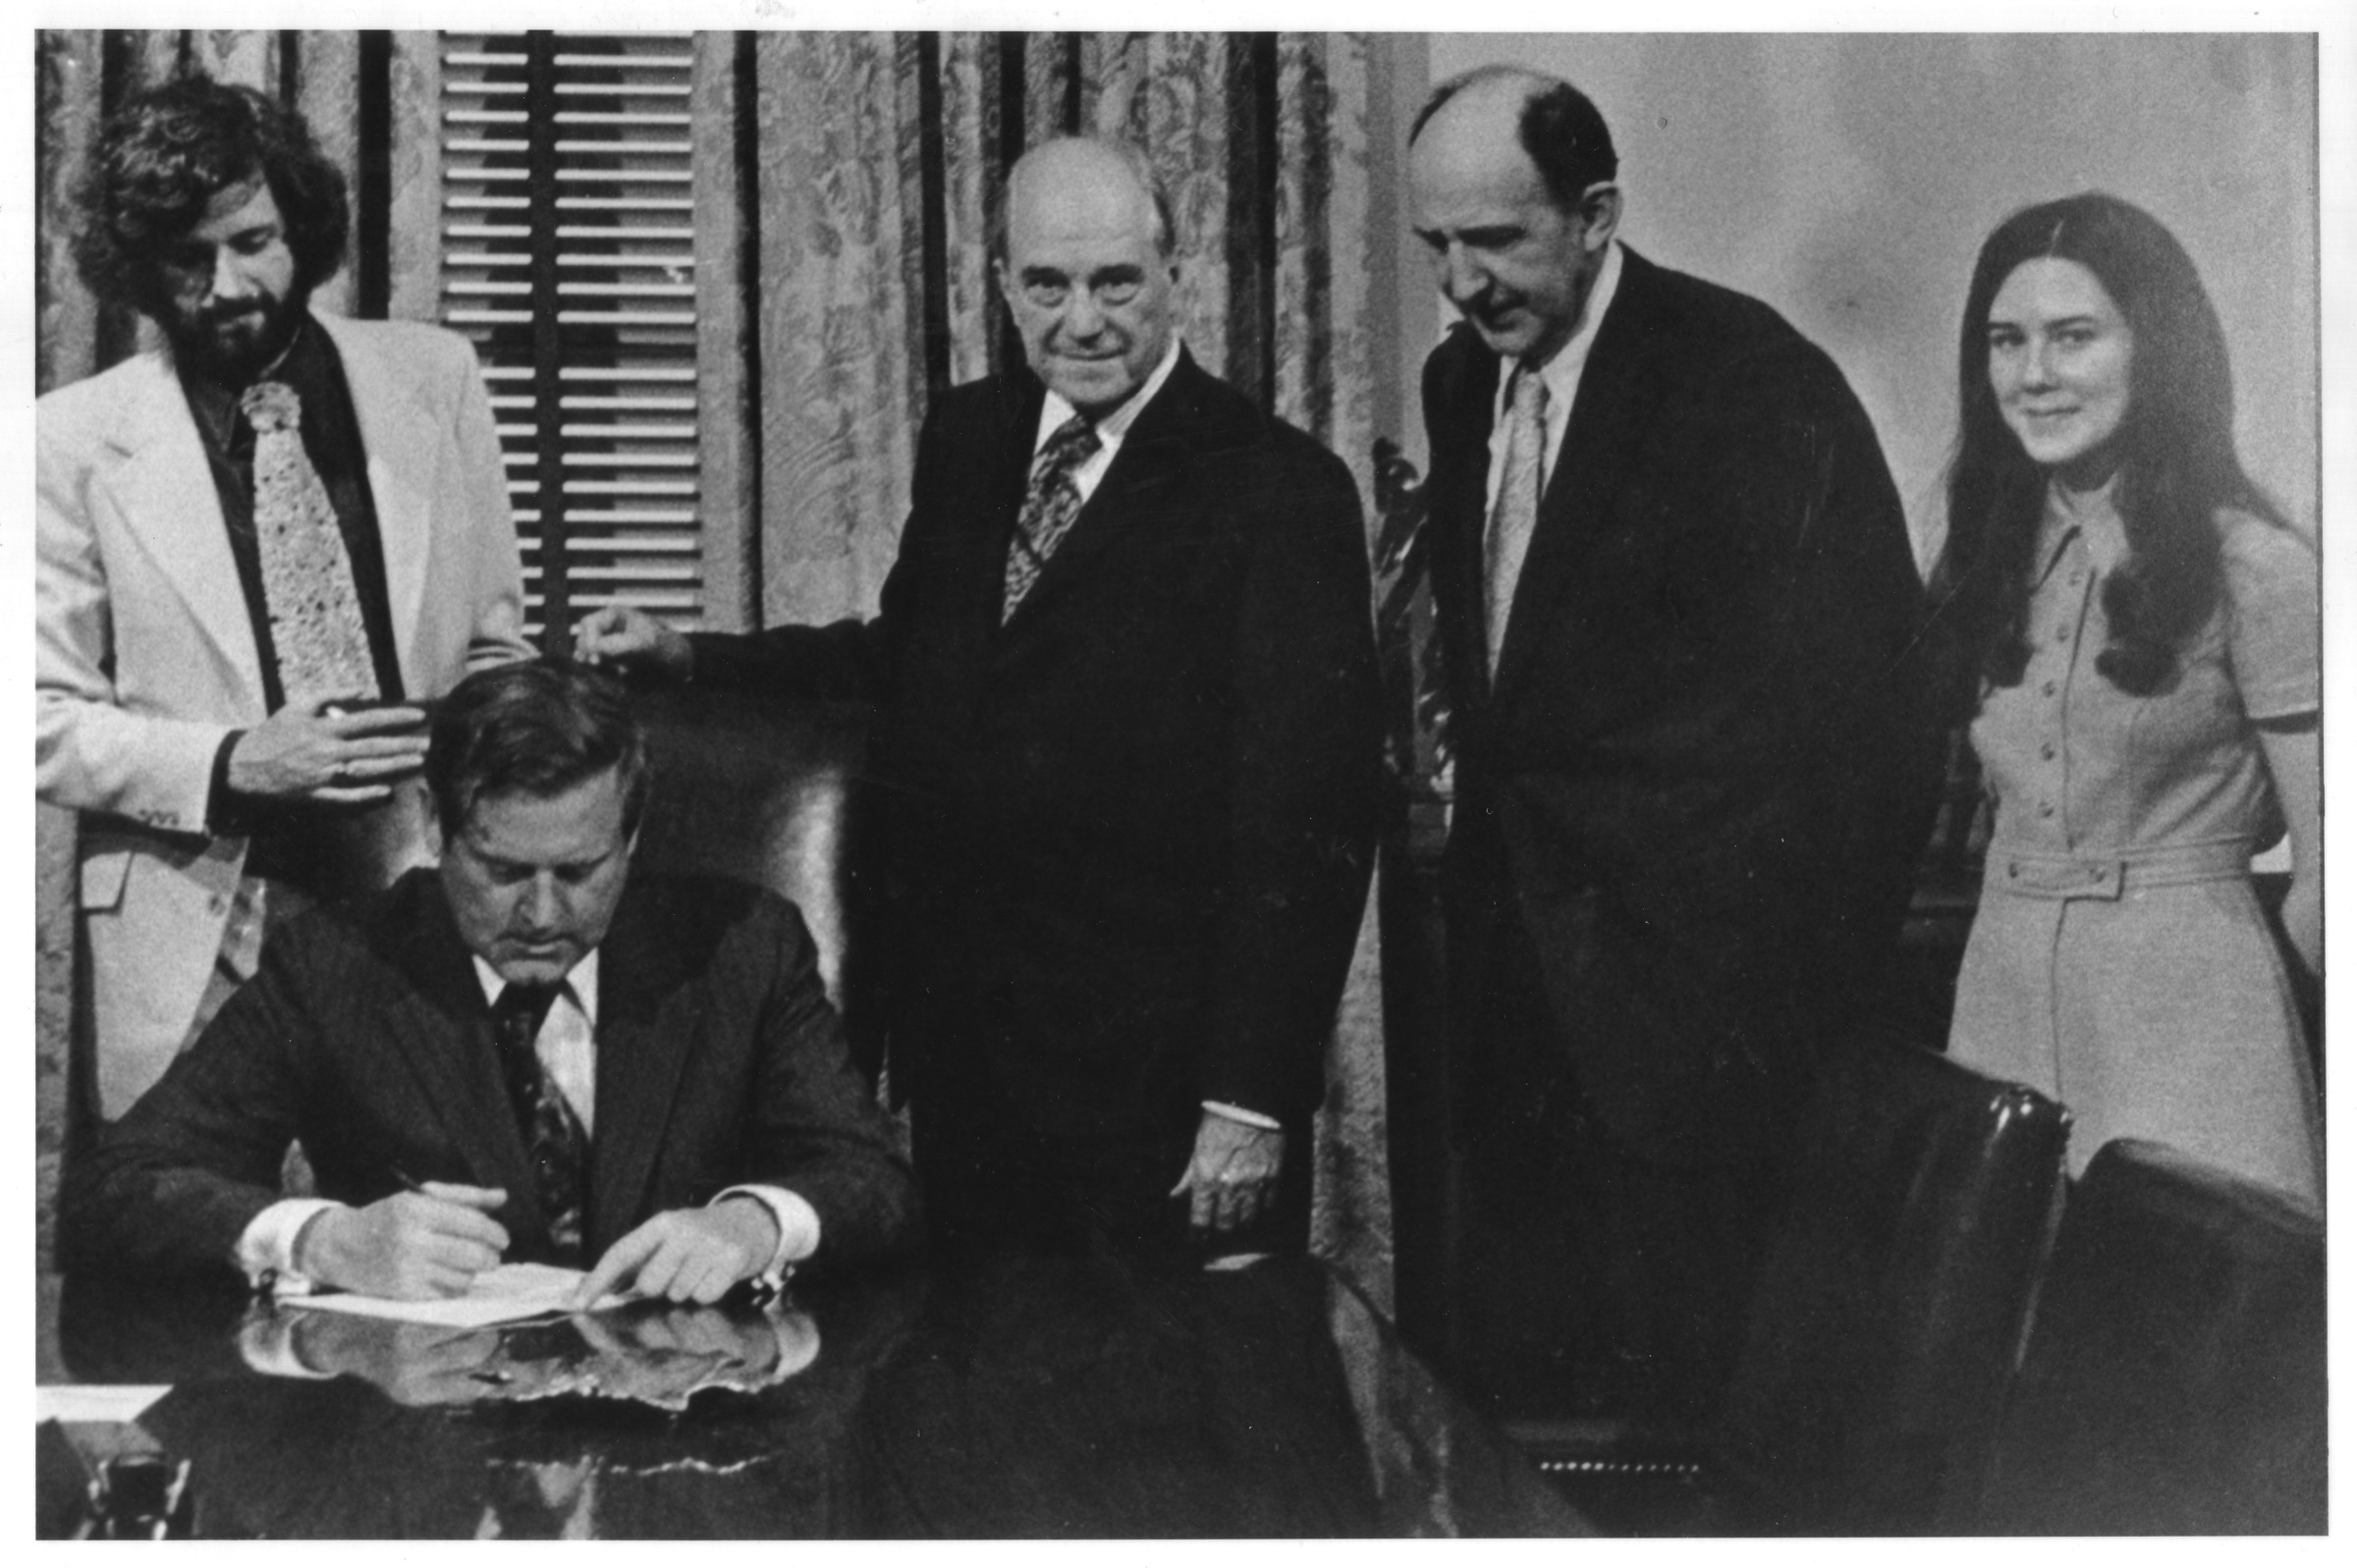 Governor A. Linwood Holton signs H-210 separating George Mason College from the University of Virginia, April 7, 1972 